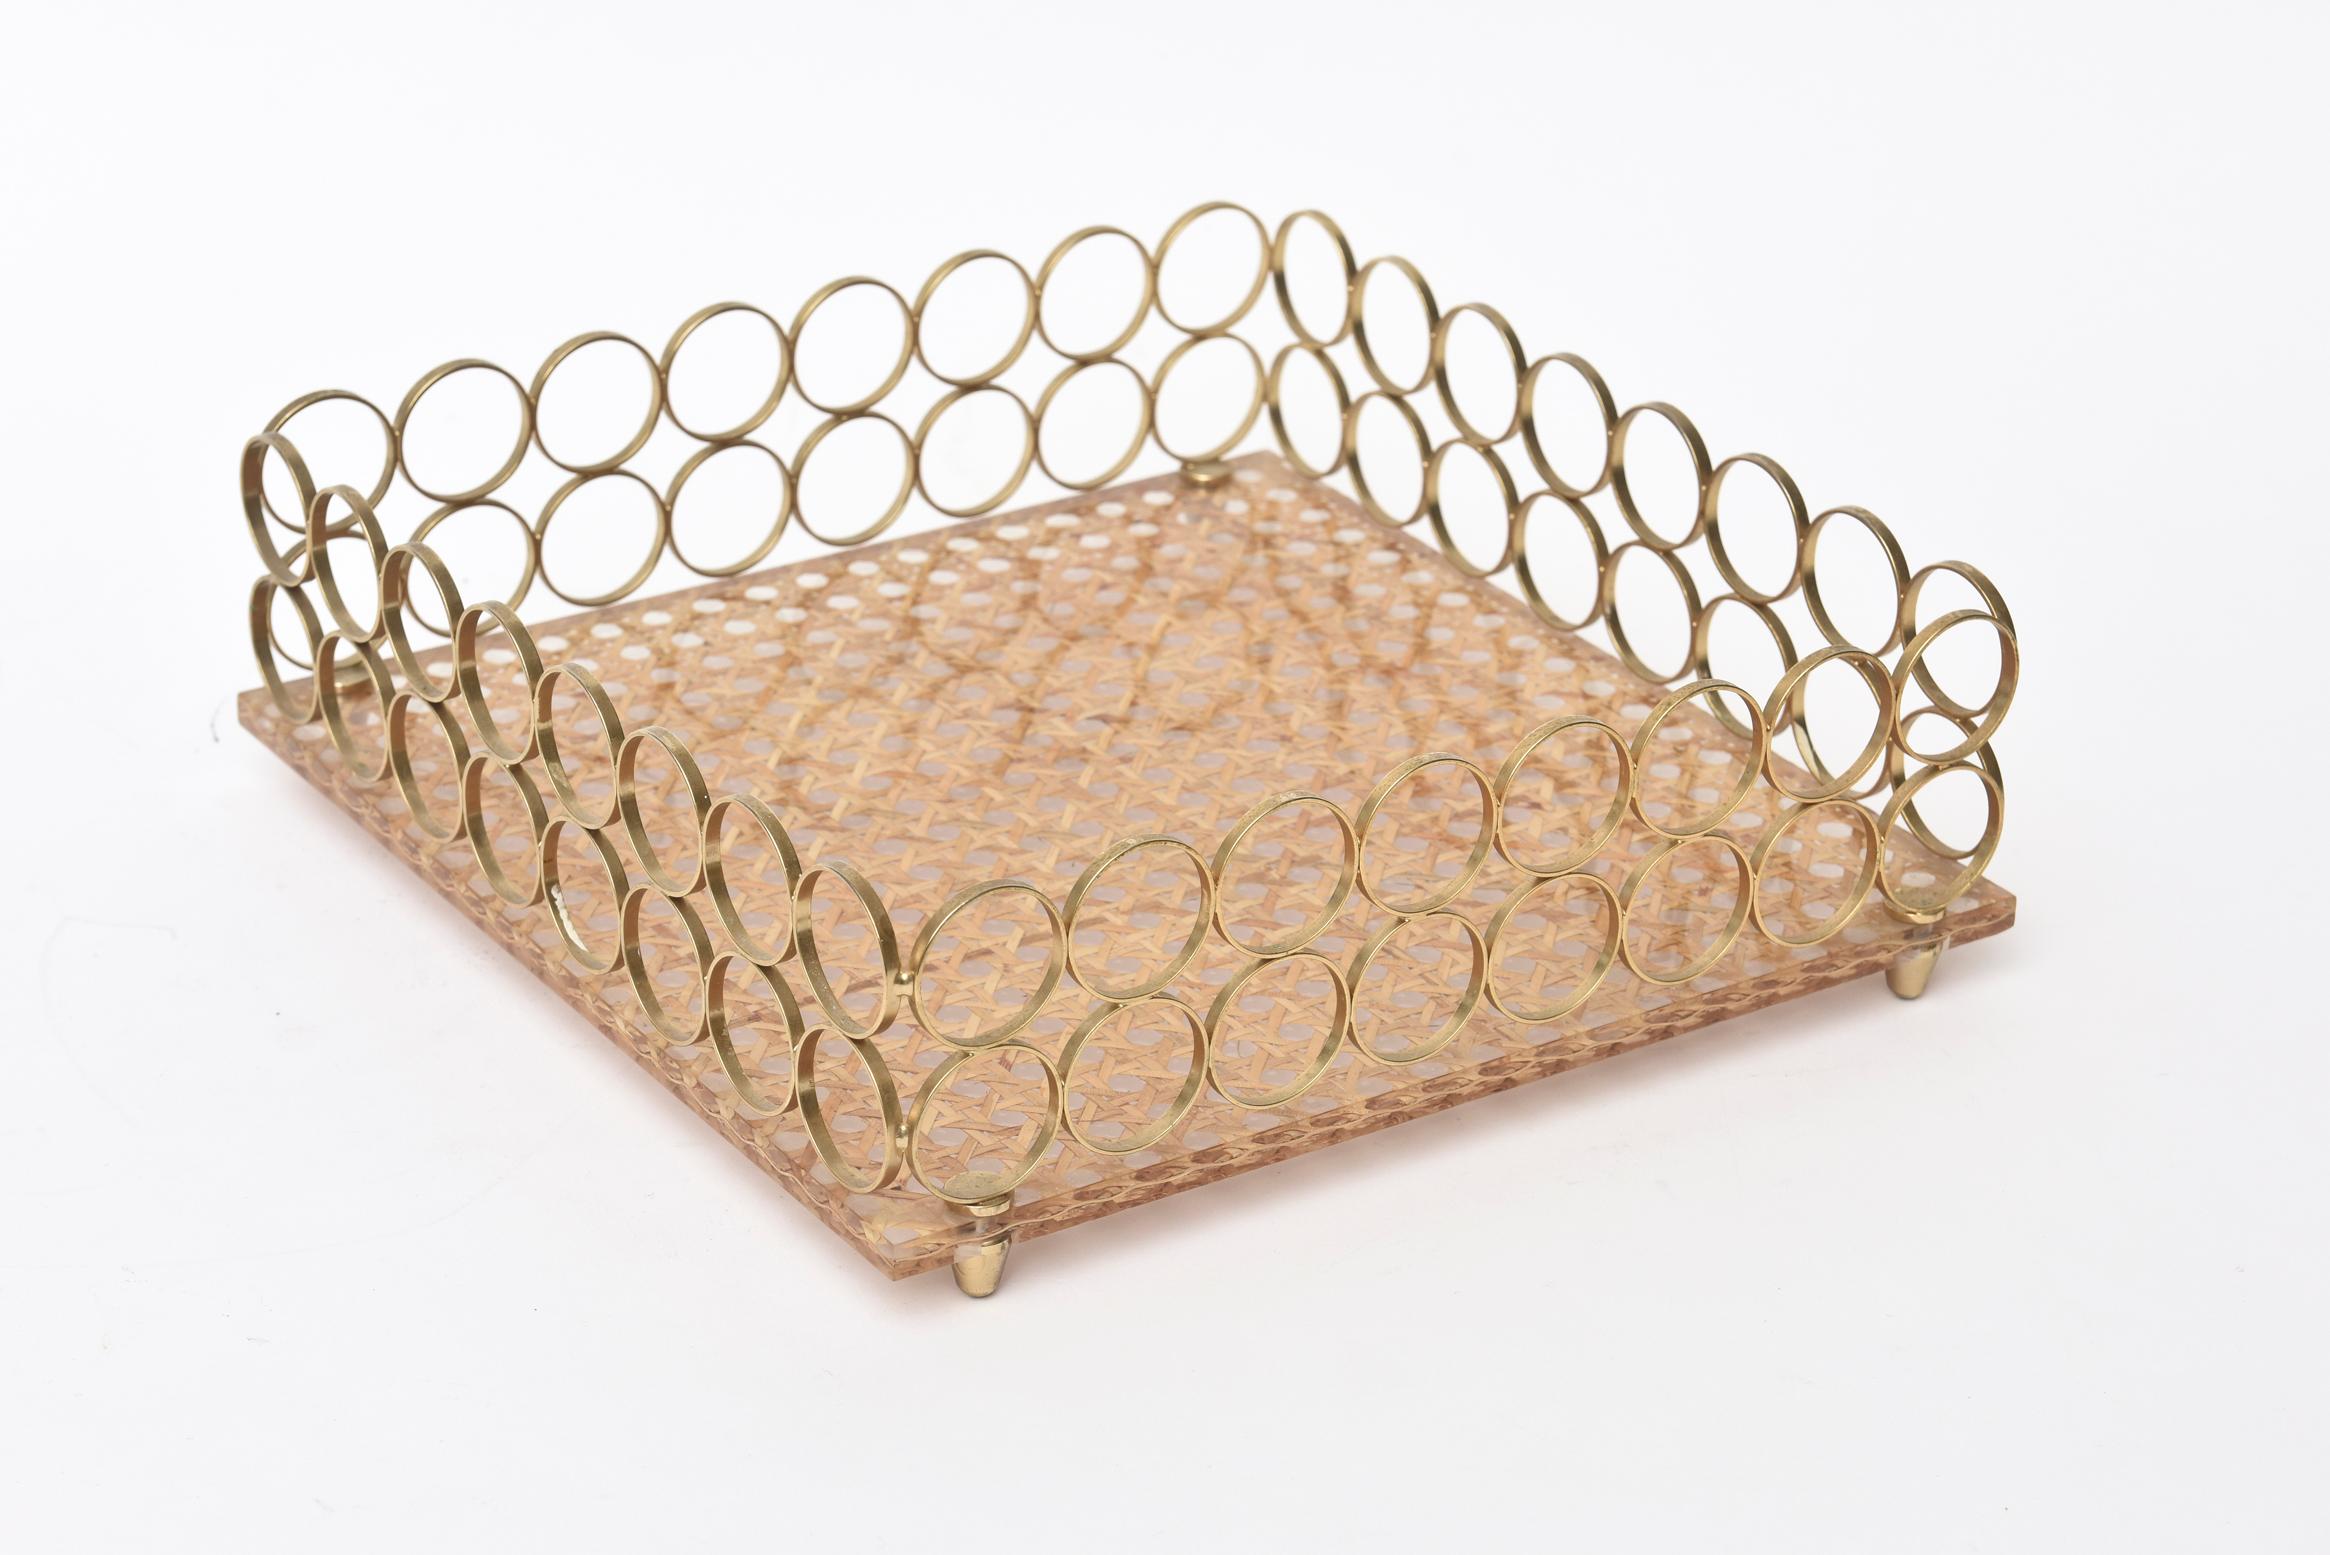 This lovely vintage Italian square tray has 2 rows of circles of brass as the borders and a caned base with a Lucite top. It is from the 1970s. It has 4 peg feet. Great for serving, for barware or for decoration. The uses are for many applications.